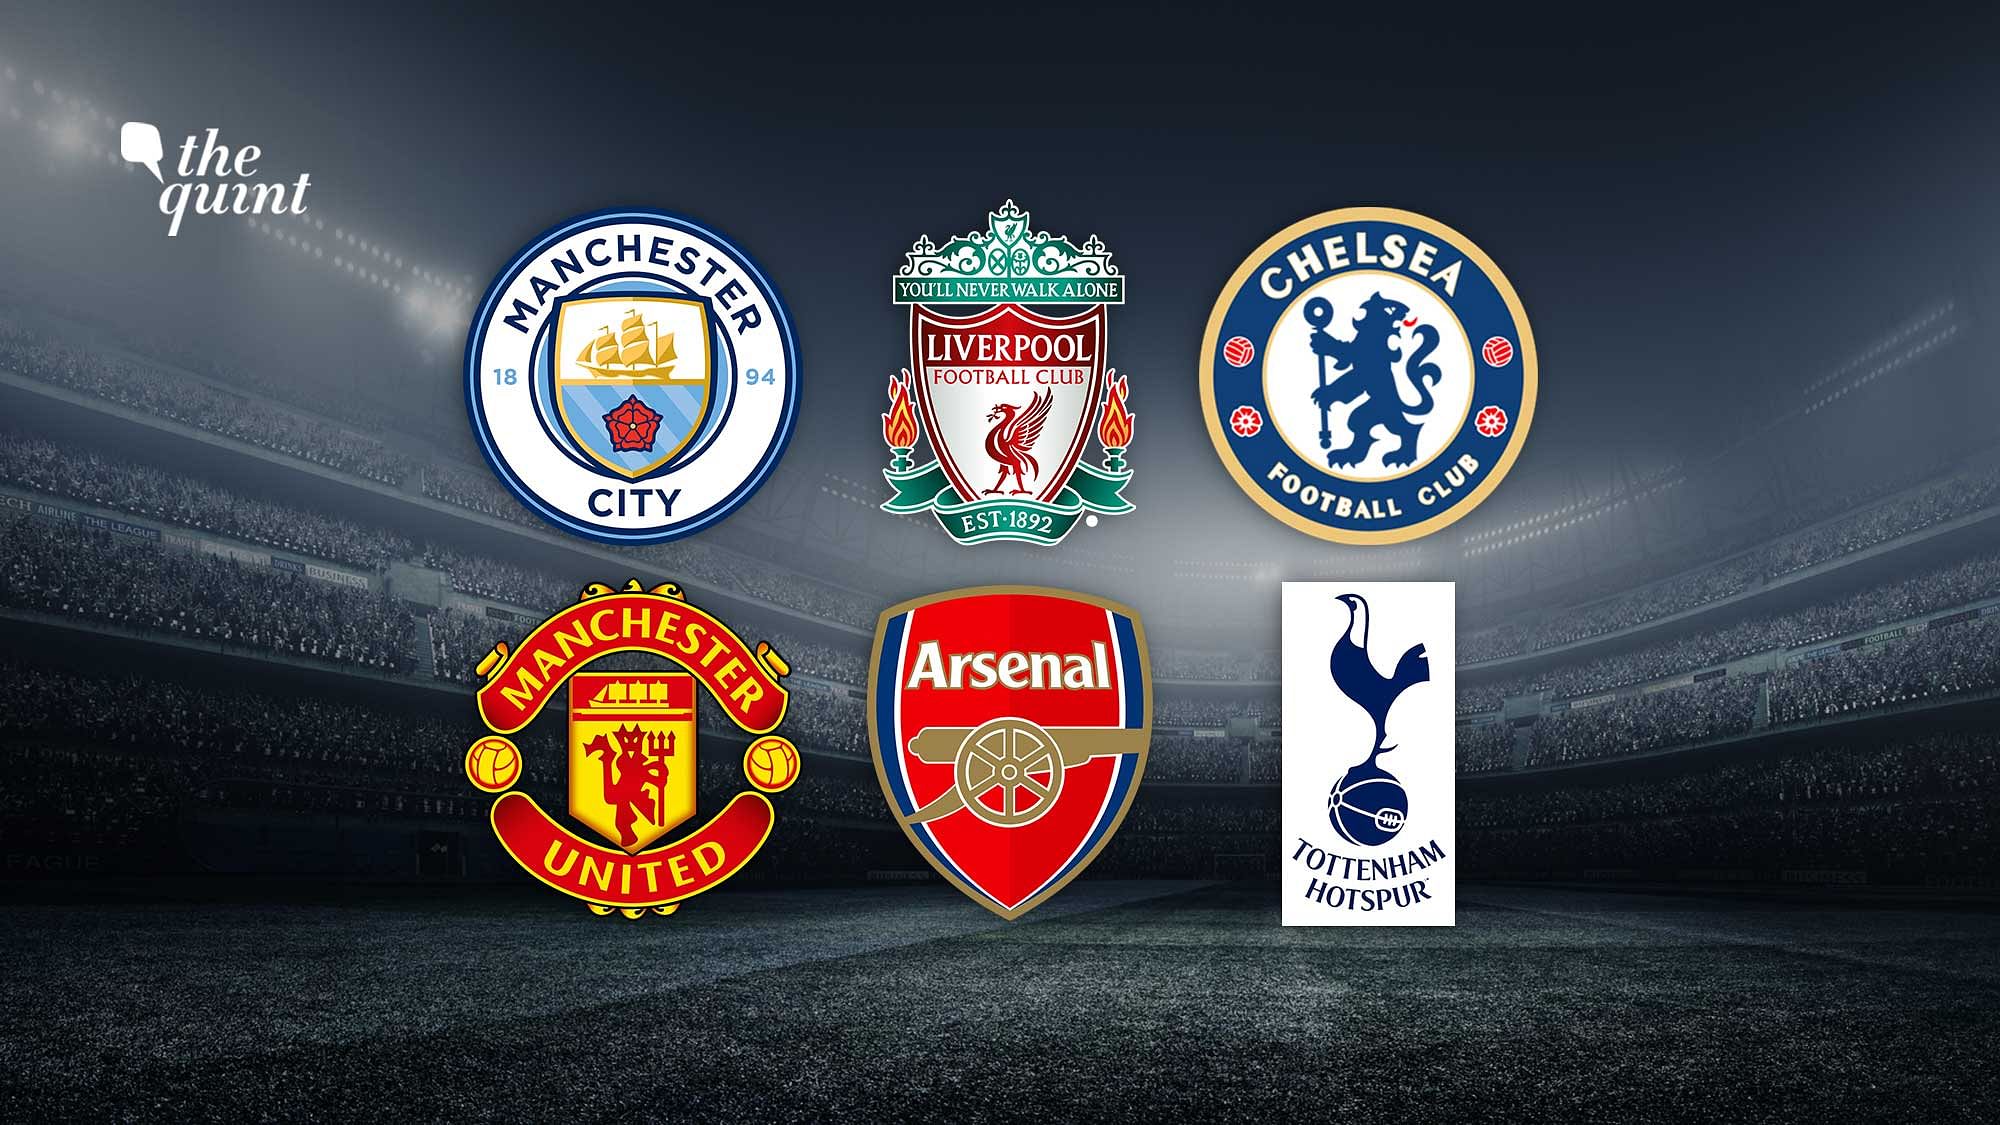 Man City led the way among the 6 Premier League clubs pulling out of the European Super League.